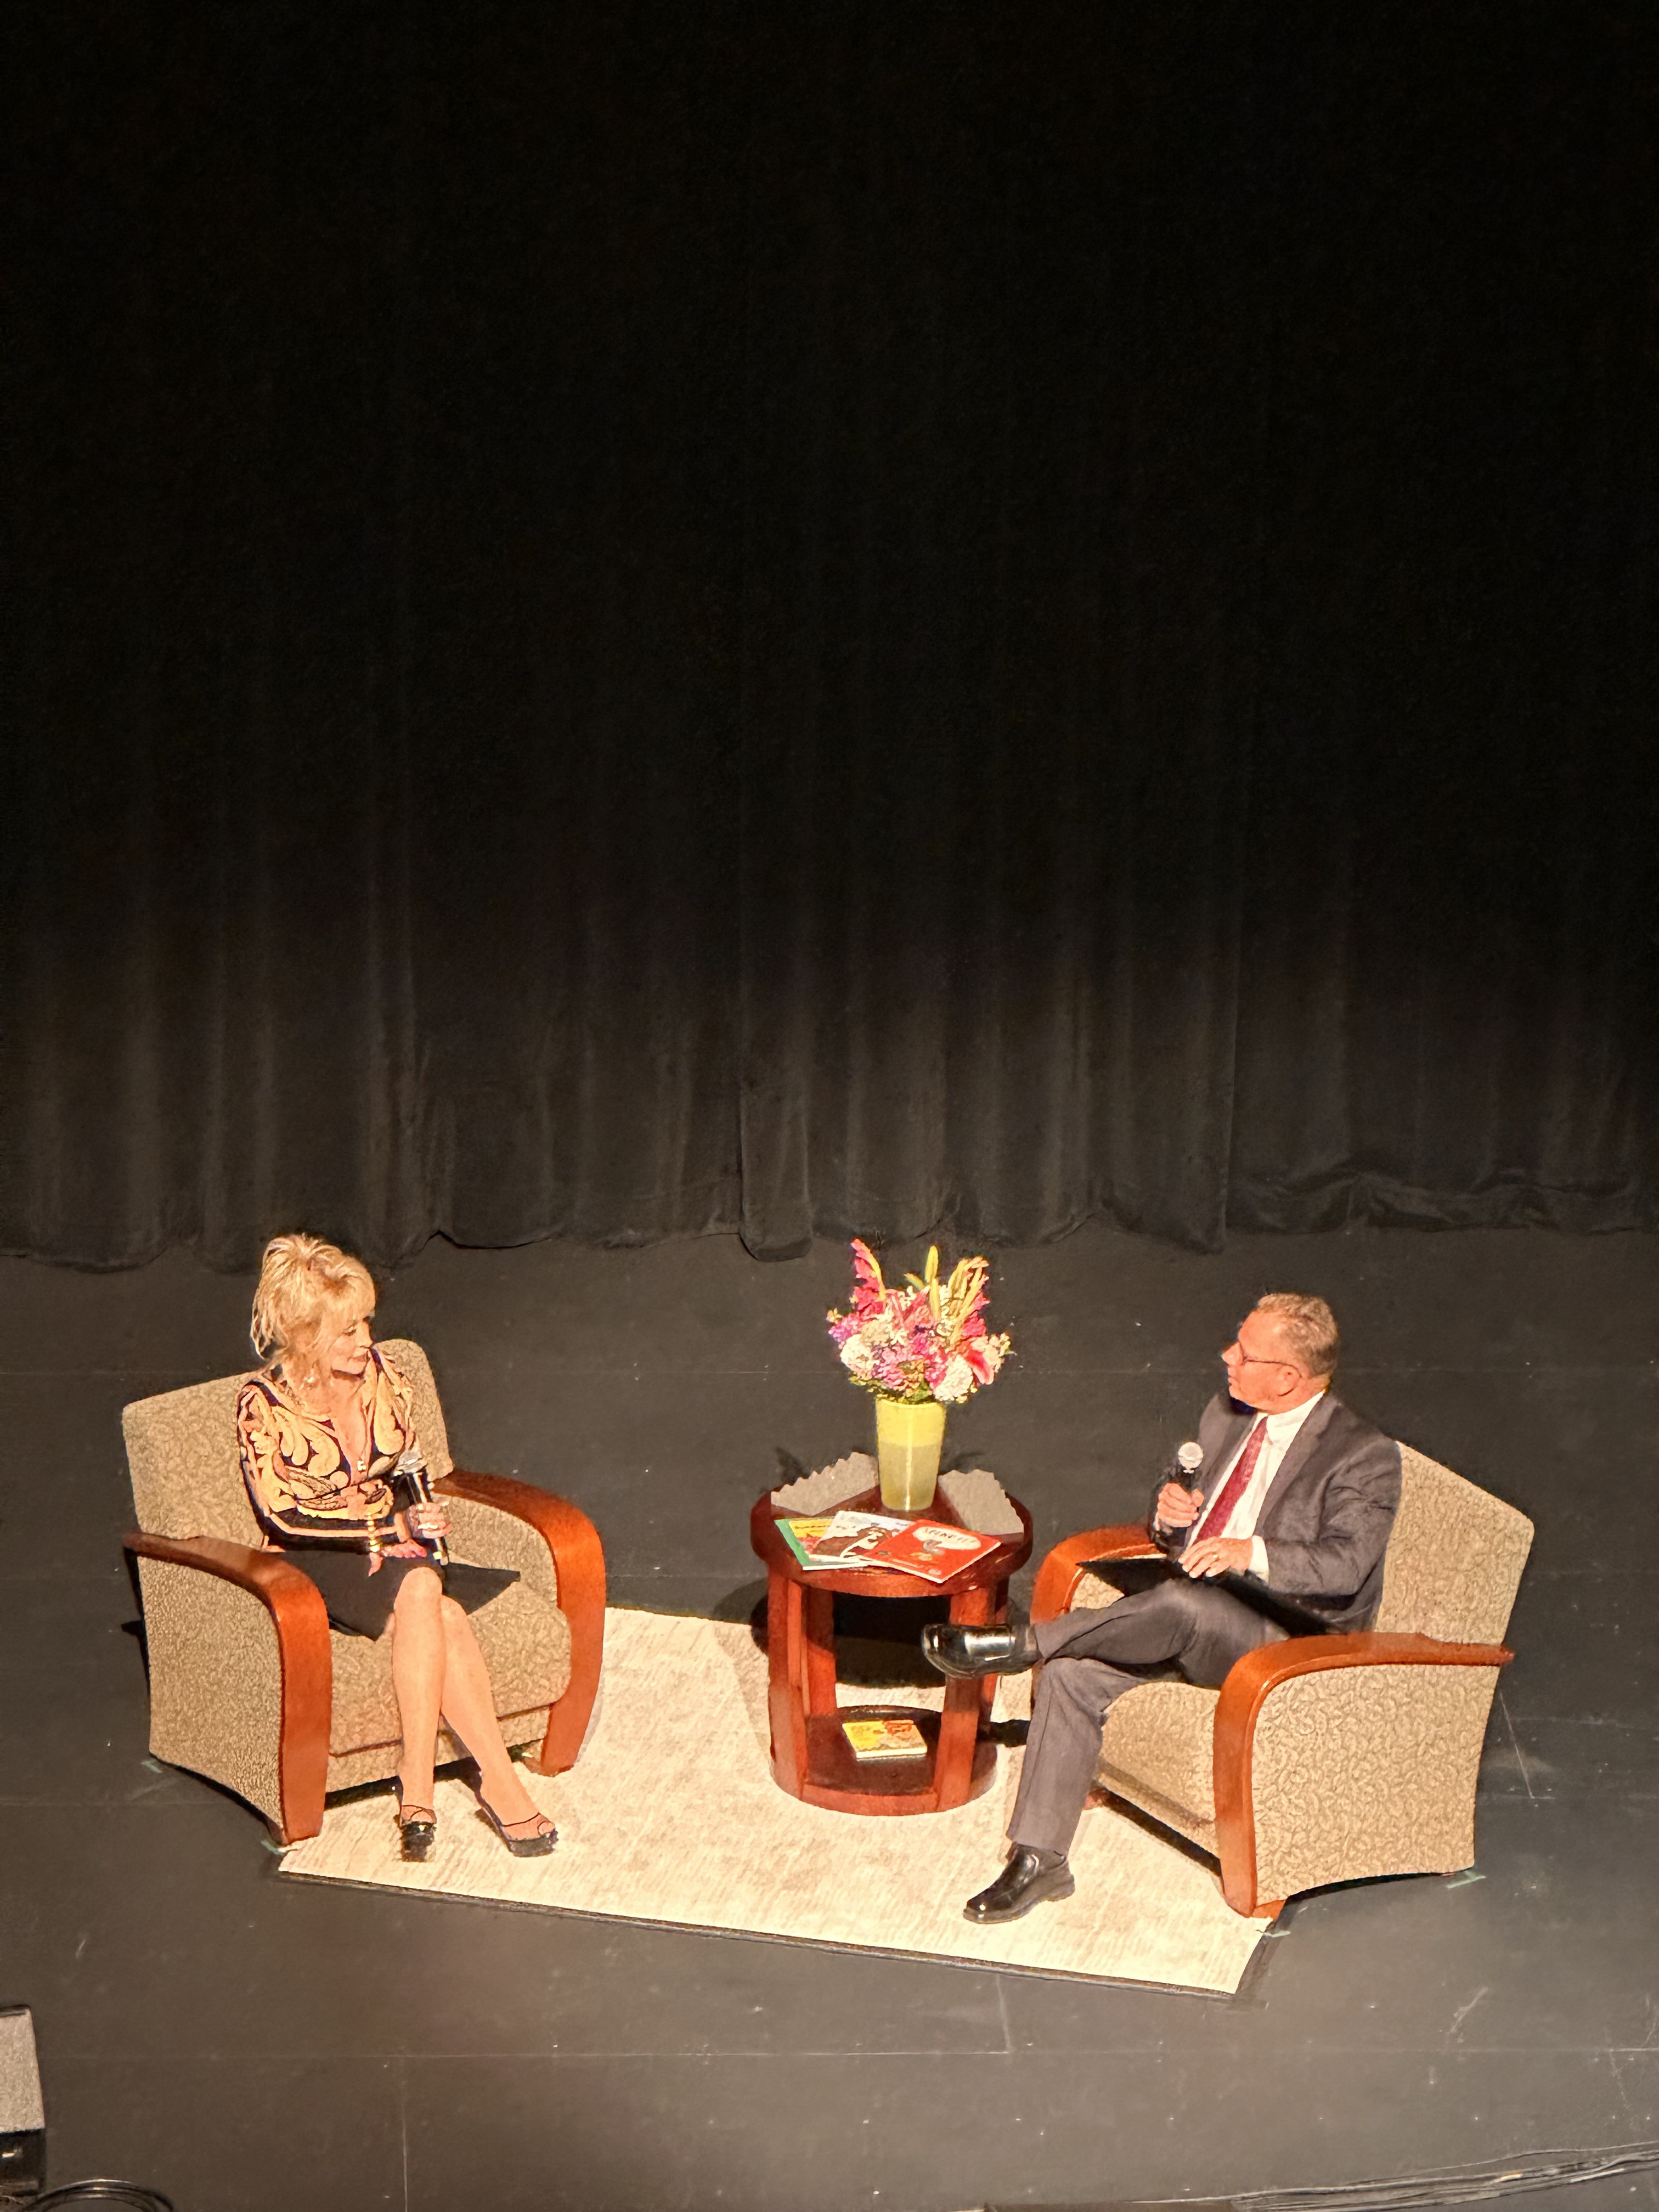 State Superintendent, Chris Reykdahl, asked Dolly Parton questions about her career, love of reading and passion for early education. CREDIT: Lauren Gallup, NWPB